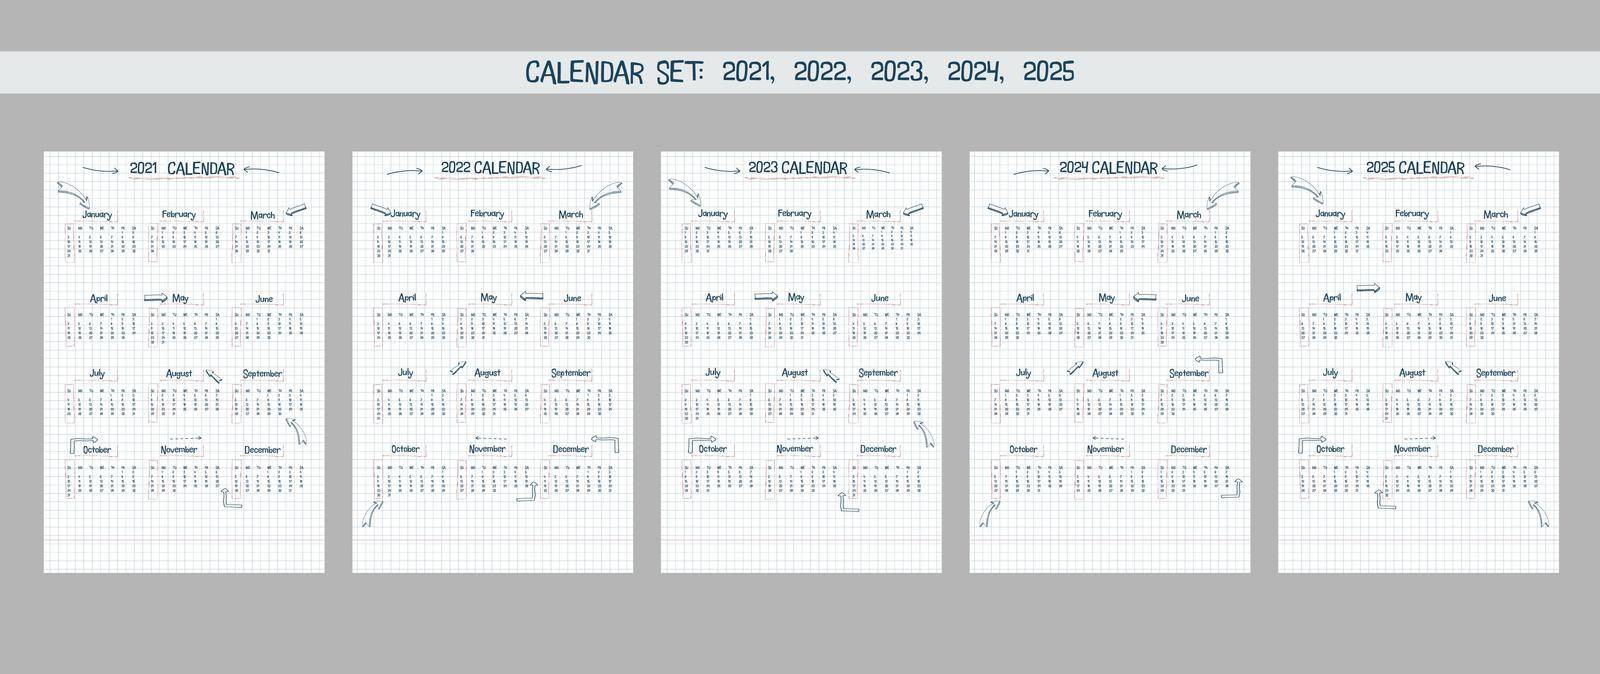 Calendar set 2021 2022 2023 2024 2025. hand drawn font type text and elements, school note style, checkered notebook sheet with lineart arrows and frames. by MariaTem